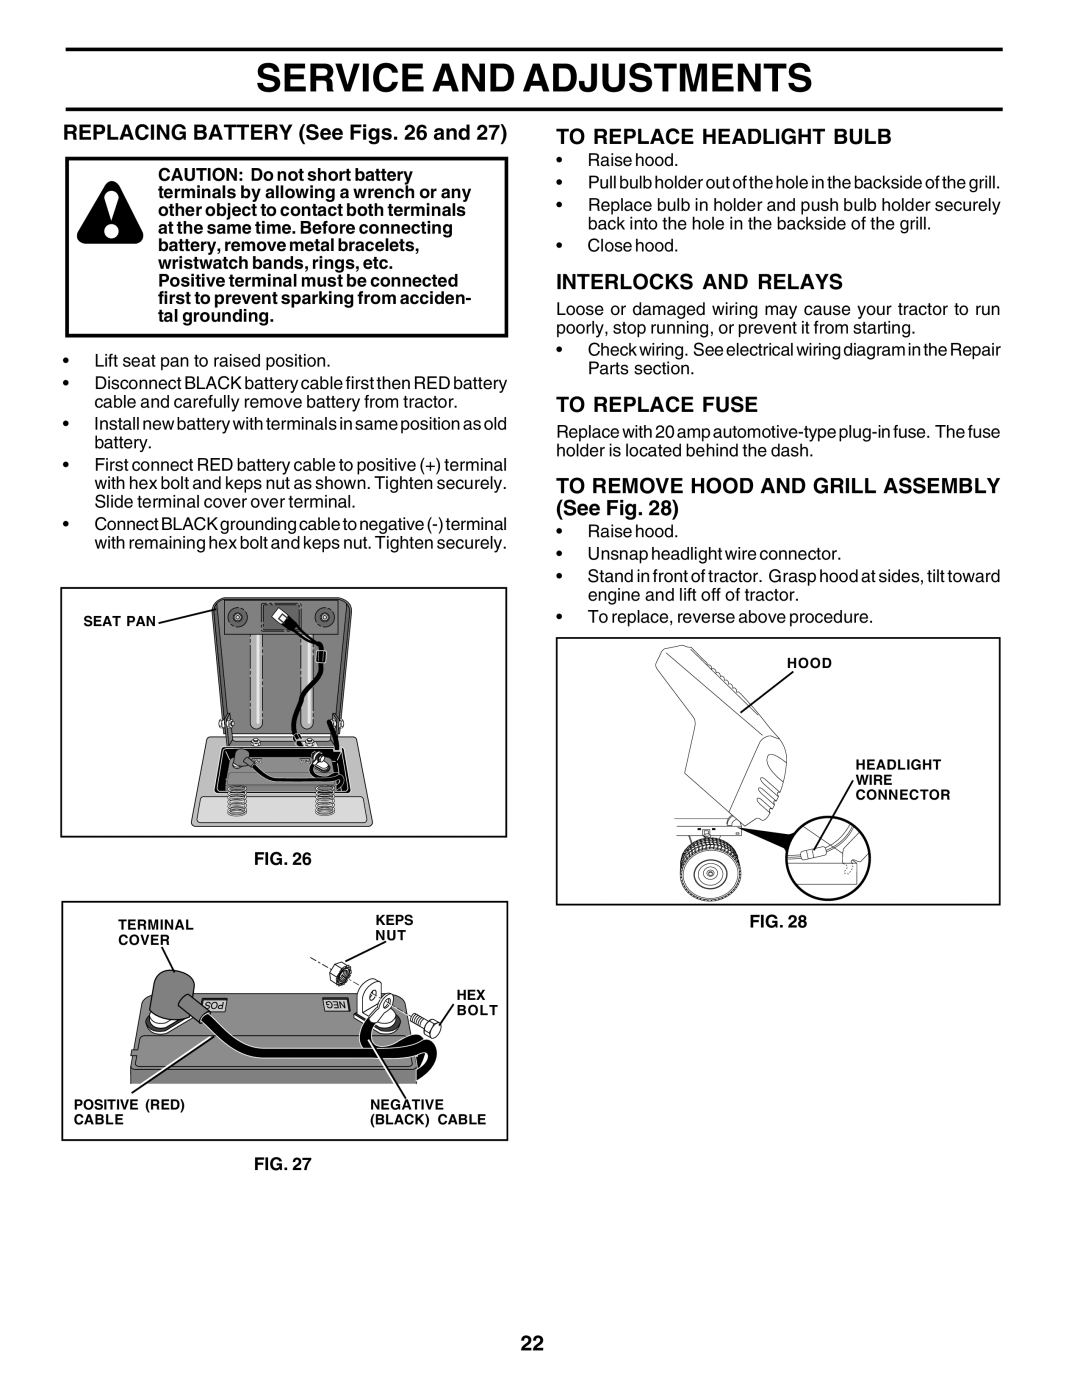 Poulan PR17542STA REPLACING BATTERY See Figs. 26 and, To Replace Headlight Bulb, Interlocks And Relays, To Replace Fuse 